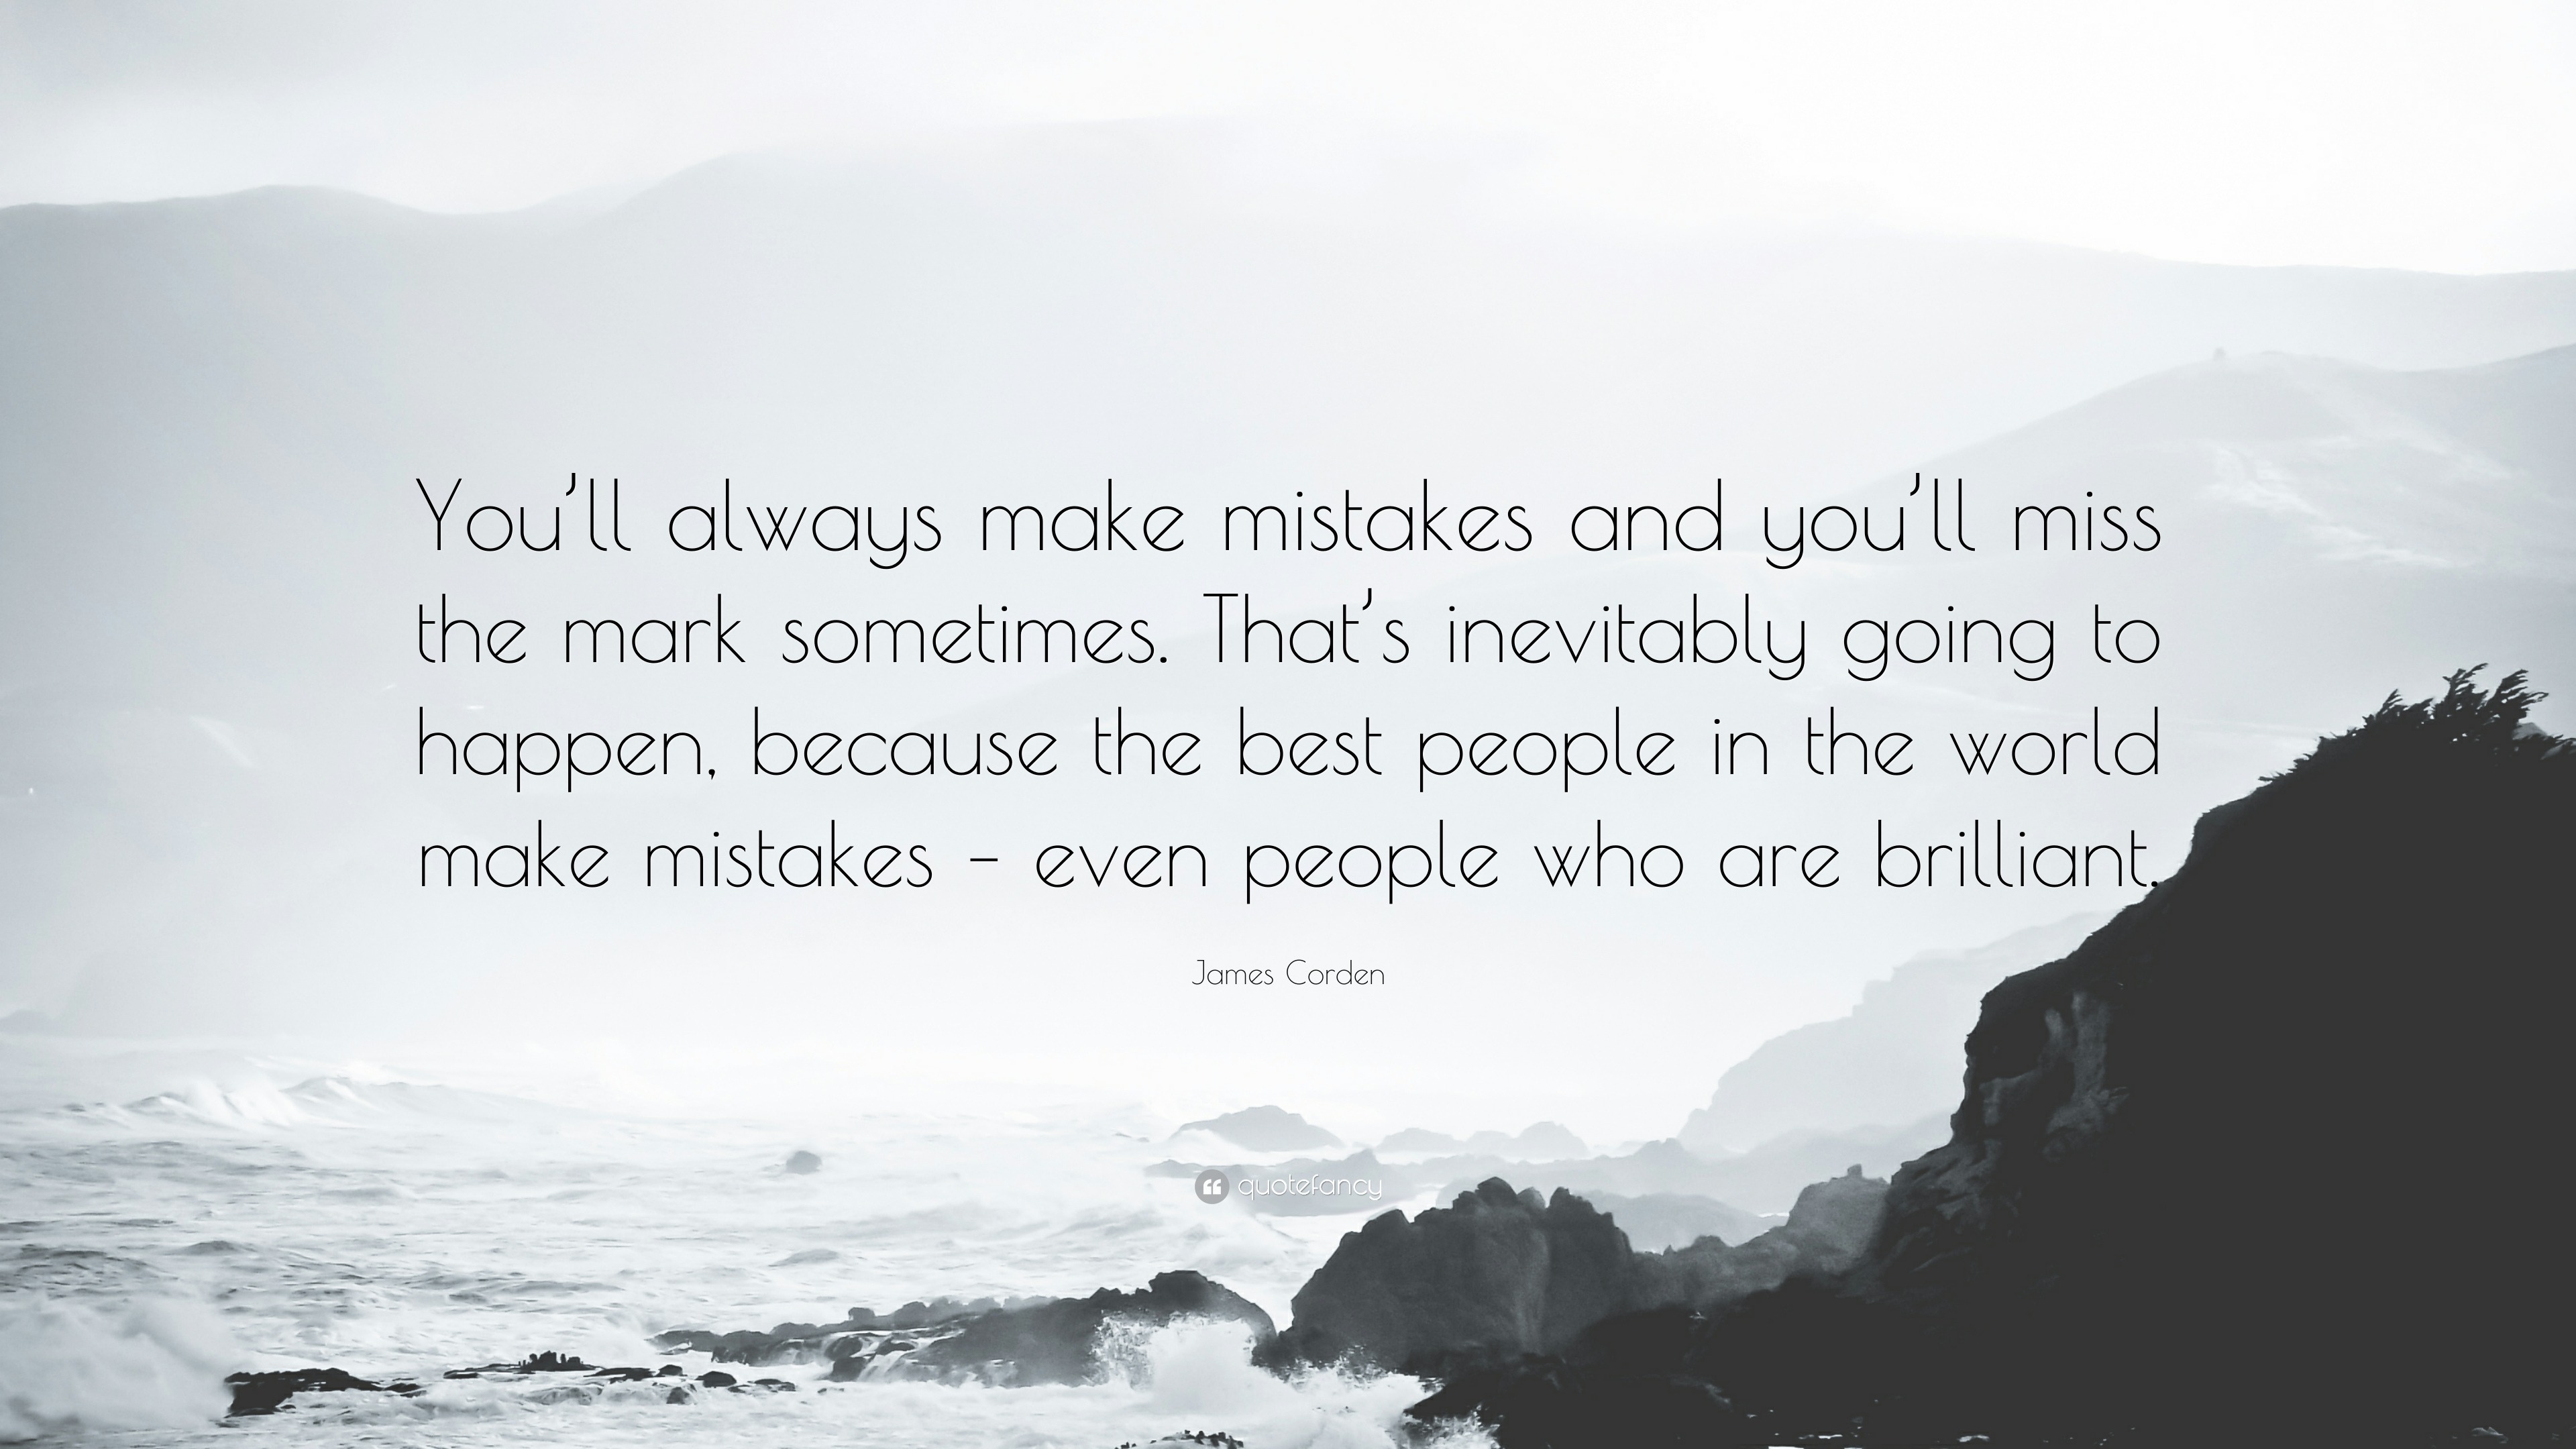 James Corden Quote: “You’ll always make mistakes and you’ll miss the